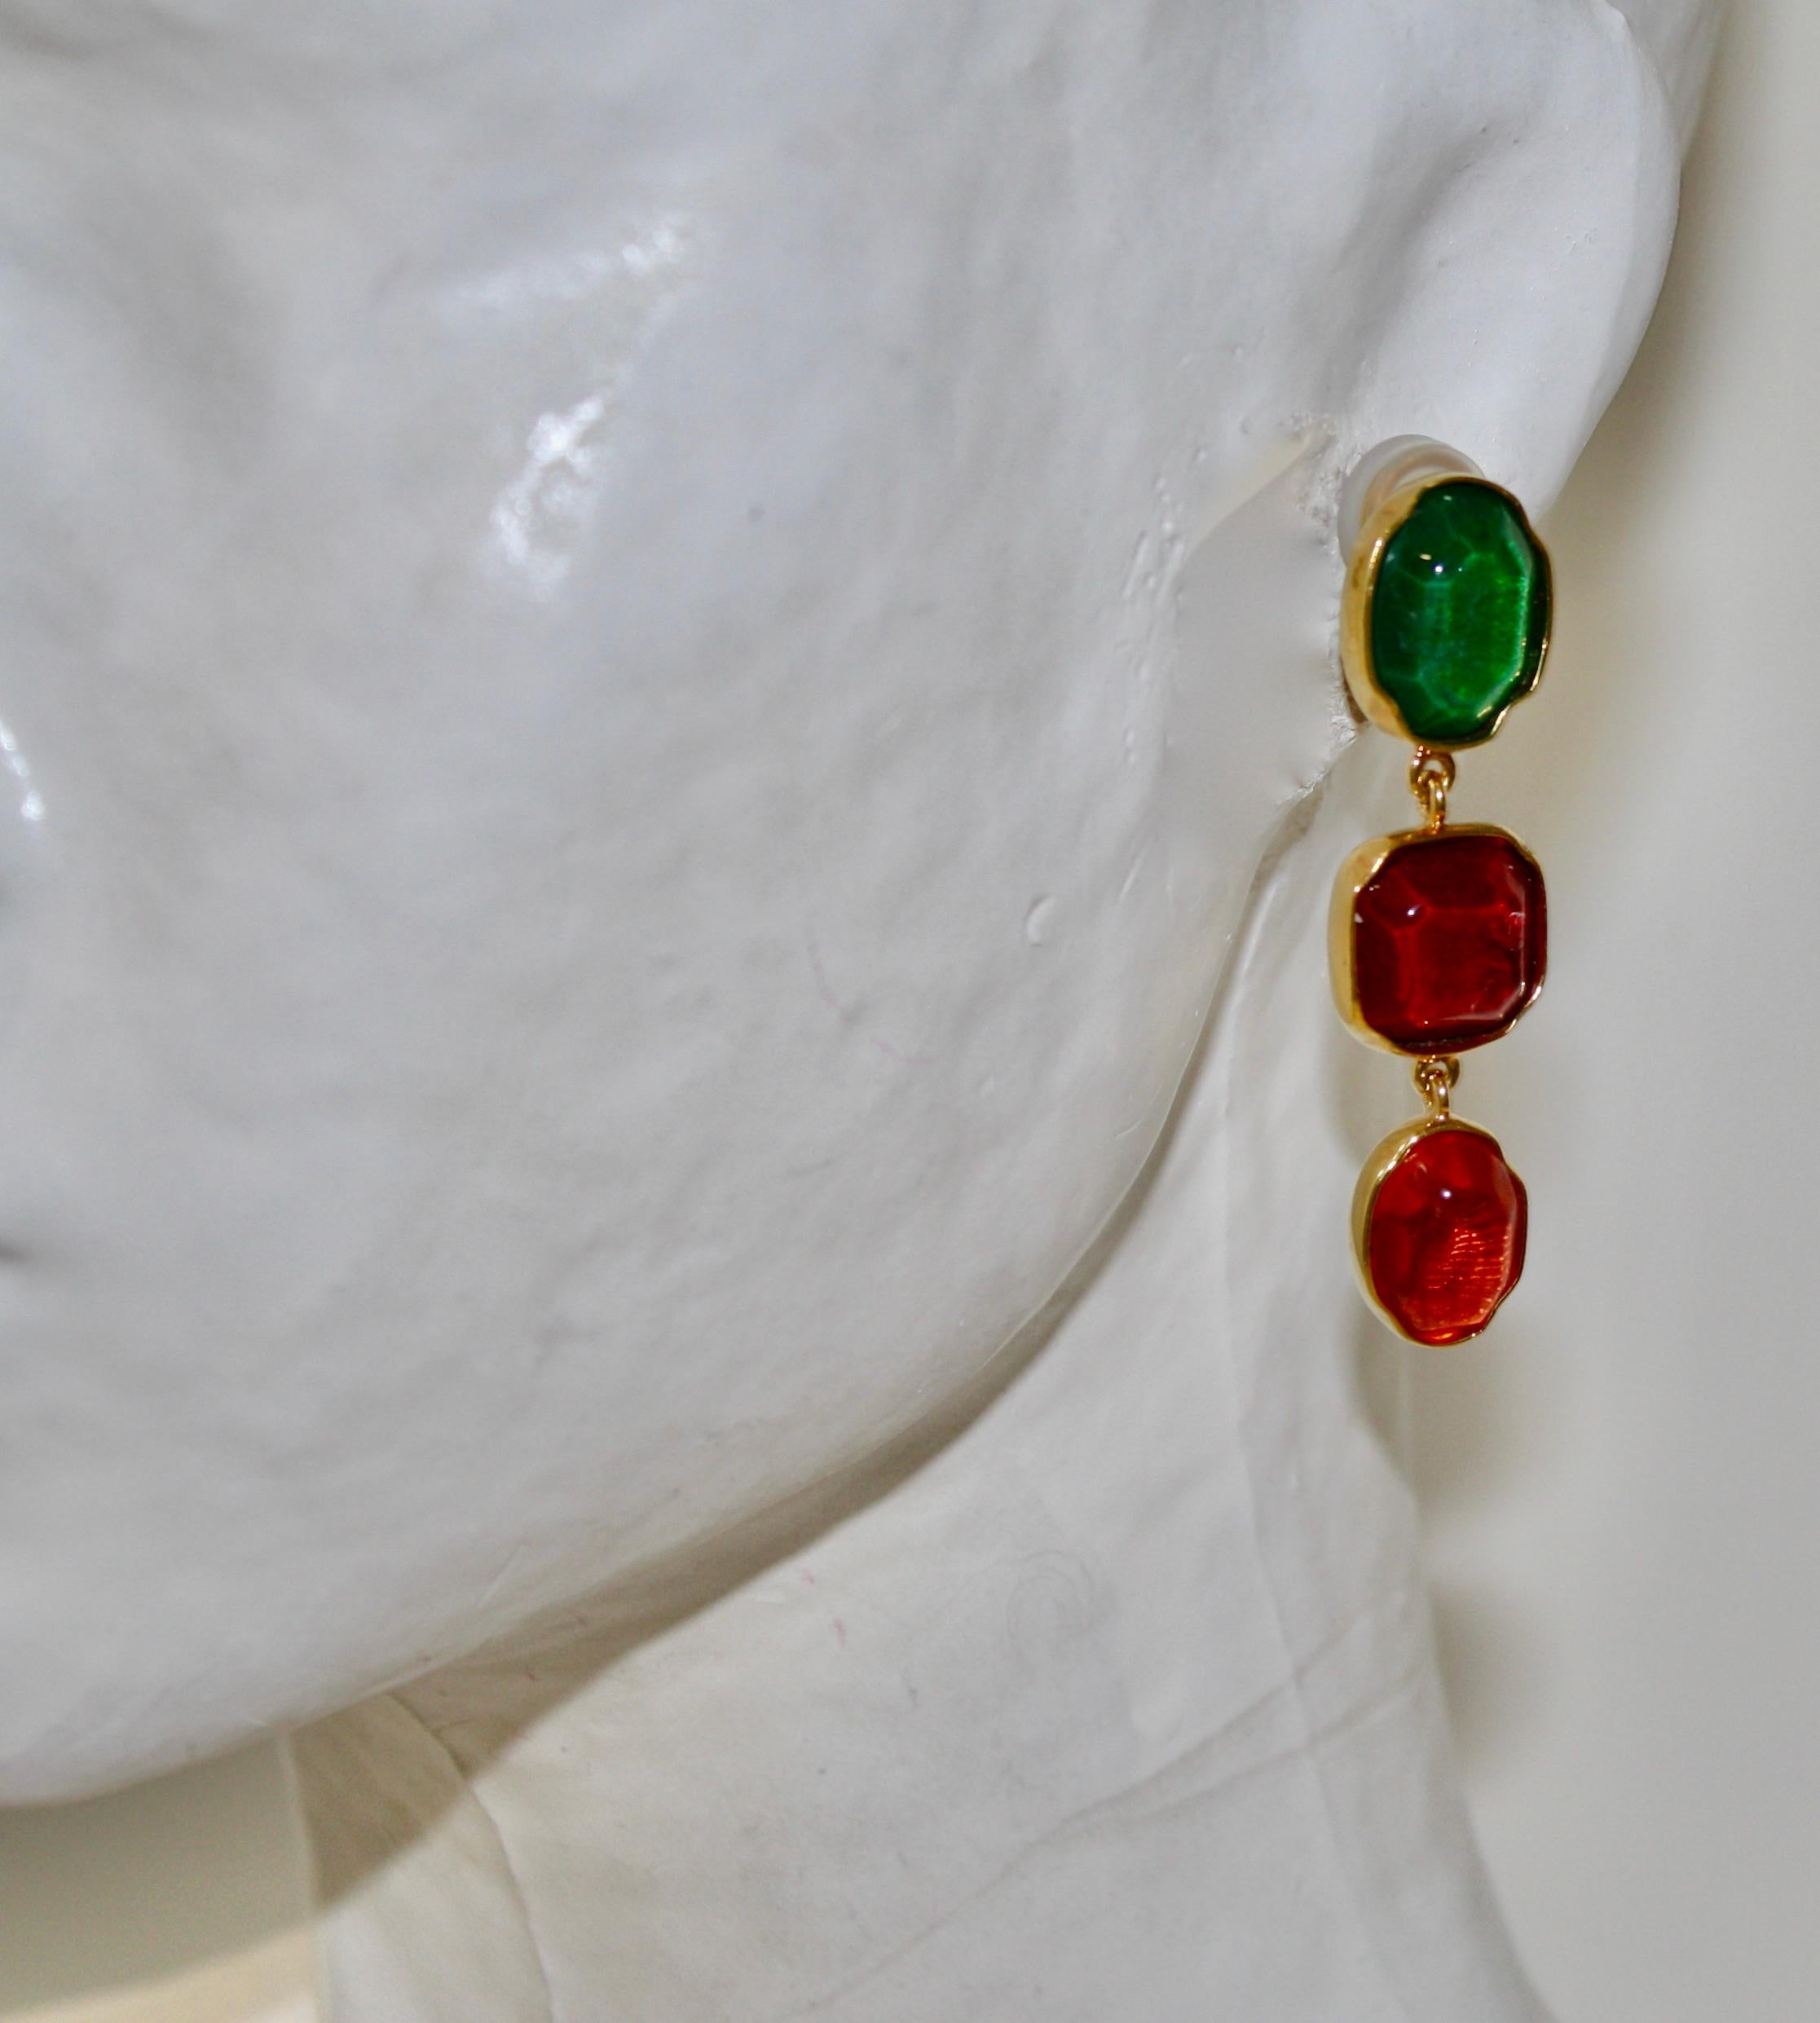 Cabochons Clip 3 cabochons earrings, Green, red and orange

A timeless theme that sees its colors change with the seasons. Each rock crystal stone is hand-dyed with beautiful shades. As each stone is unique, the intensity and depth of the color